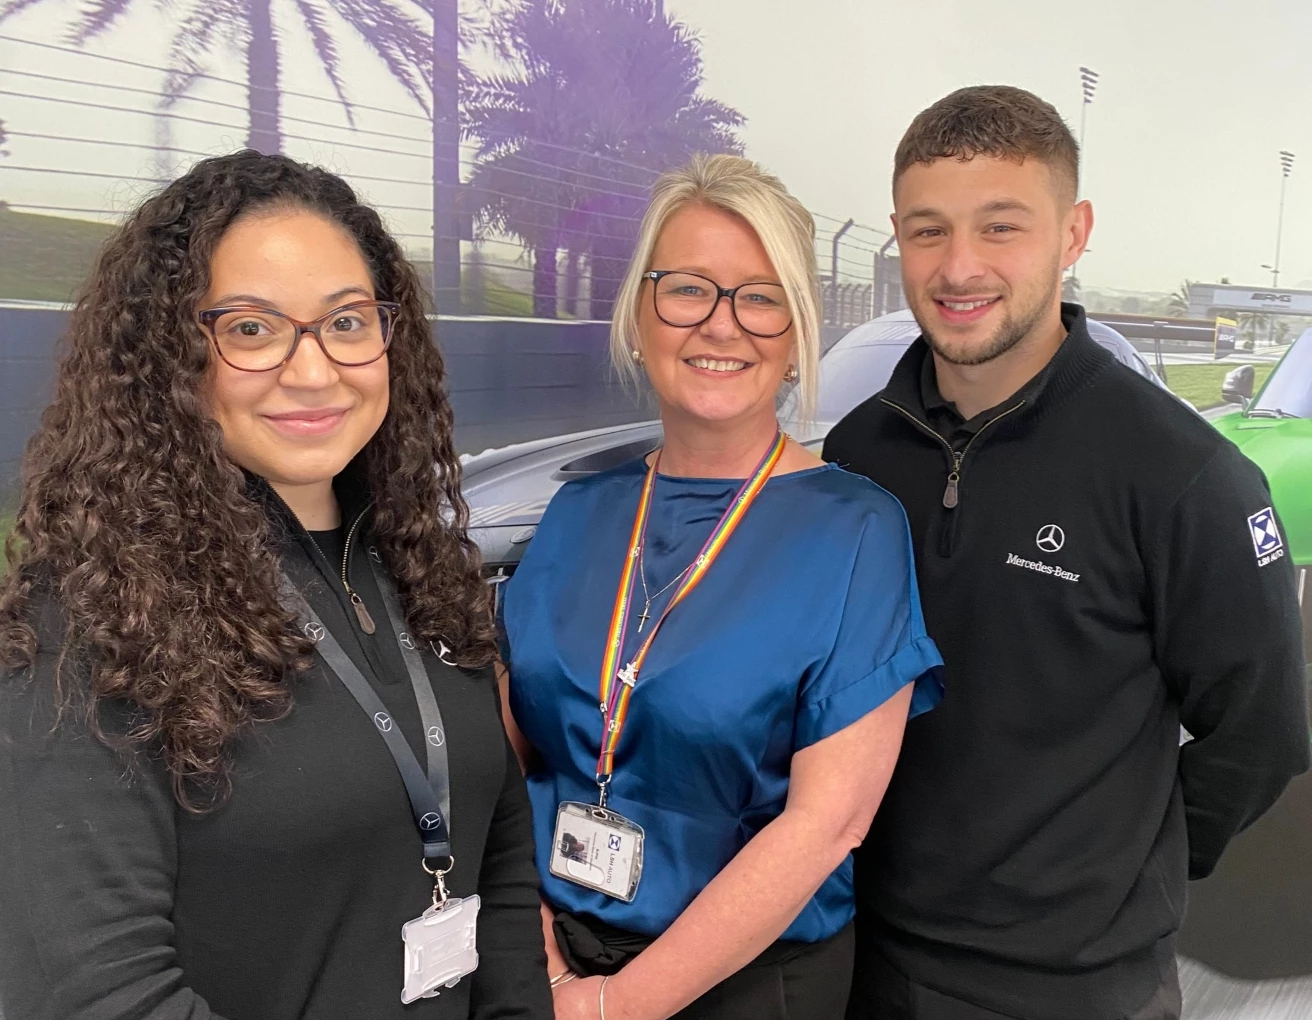 Jessica Fernandez, Becky Pitt and Marcus Mollinson from LSH Auto